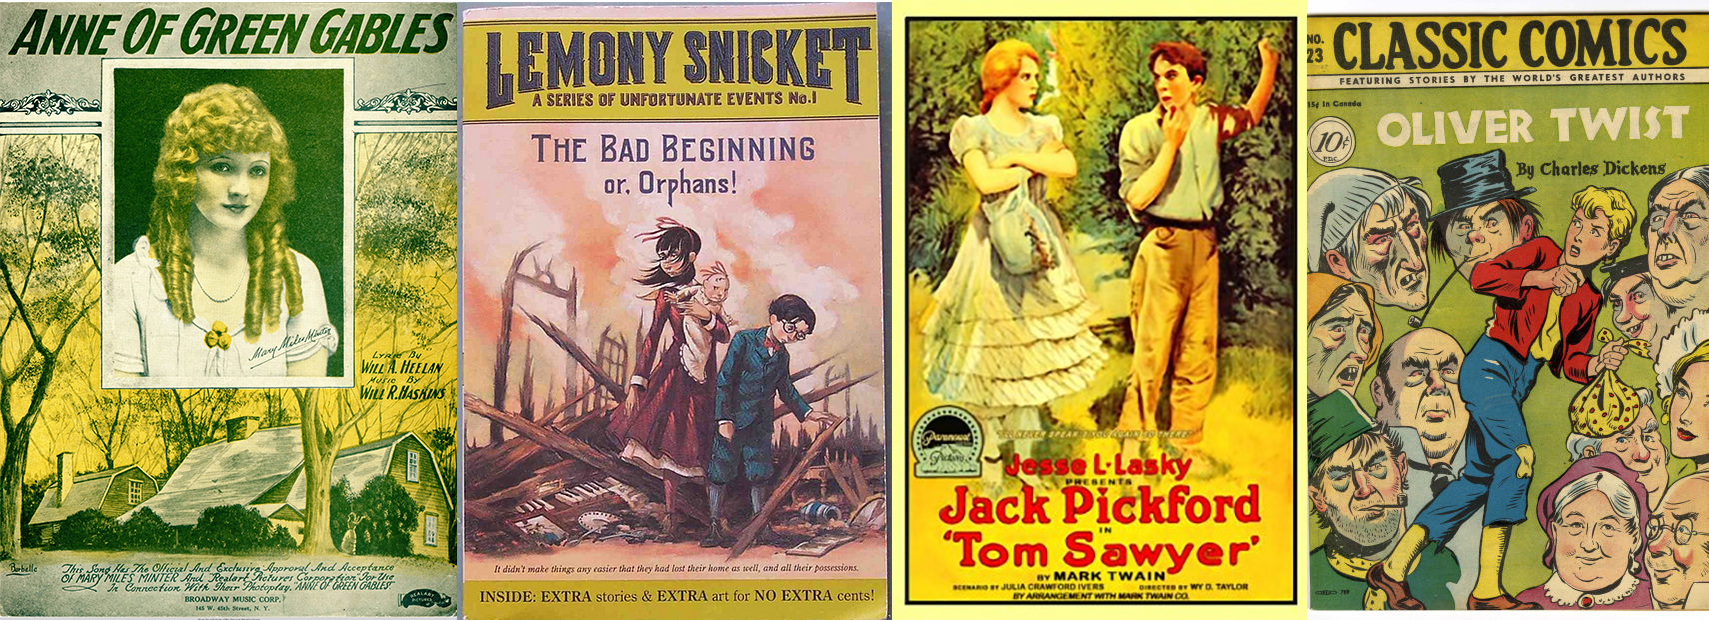 Side by side book covers of books featuring orphans. The covers include Anne of Green Gables, A Series of Unfortunate Events, Tom Sawyer, and Oliver Twist